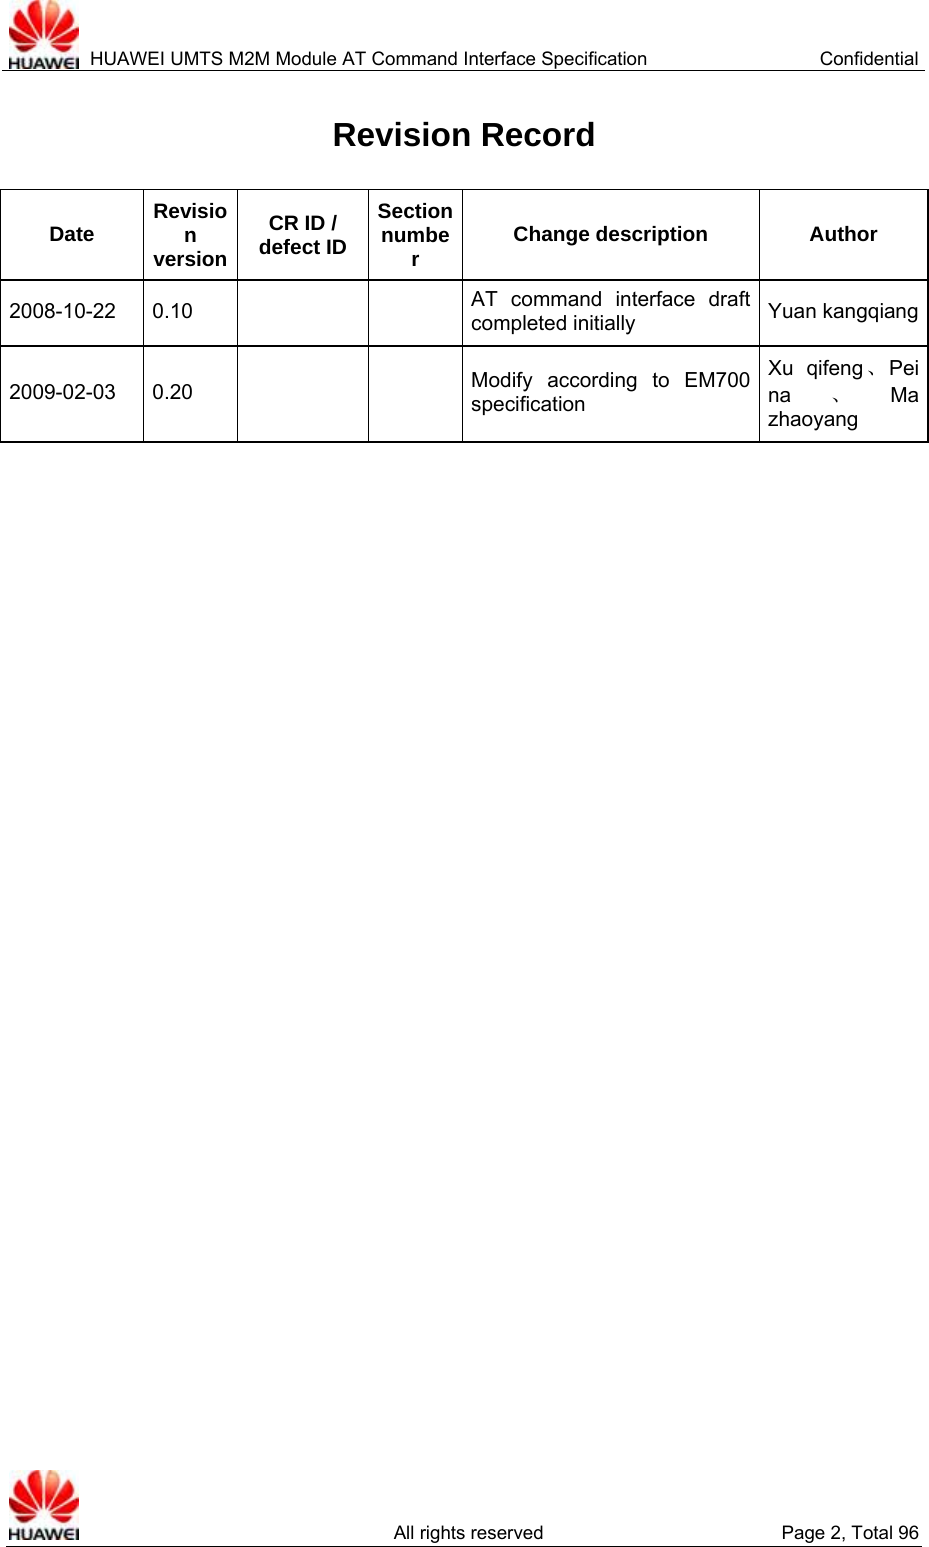  HUAWEI UMTS M2M Module AT Command Interface Specification  Confidential   All rights reserved  Page 2, Total 96 Revision Record Date  Revision versionCR ID / defect ID Section number  Change description  Author 2008-10-22 0.10      AT command interface draft completed initially    Yuan kangqiang2009-02-03 0.20      Modify according to EM700 specification Xu qifeng、Pei na 、Ma zhaoyang 